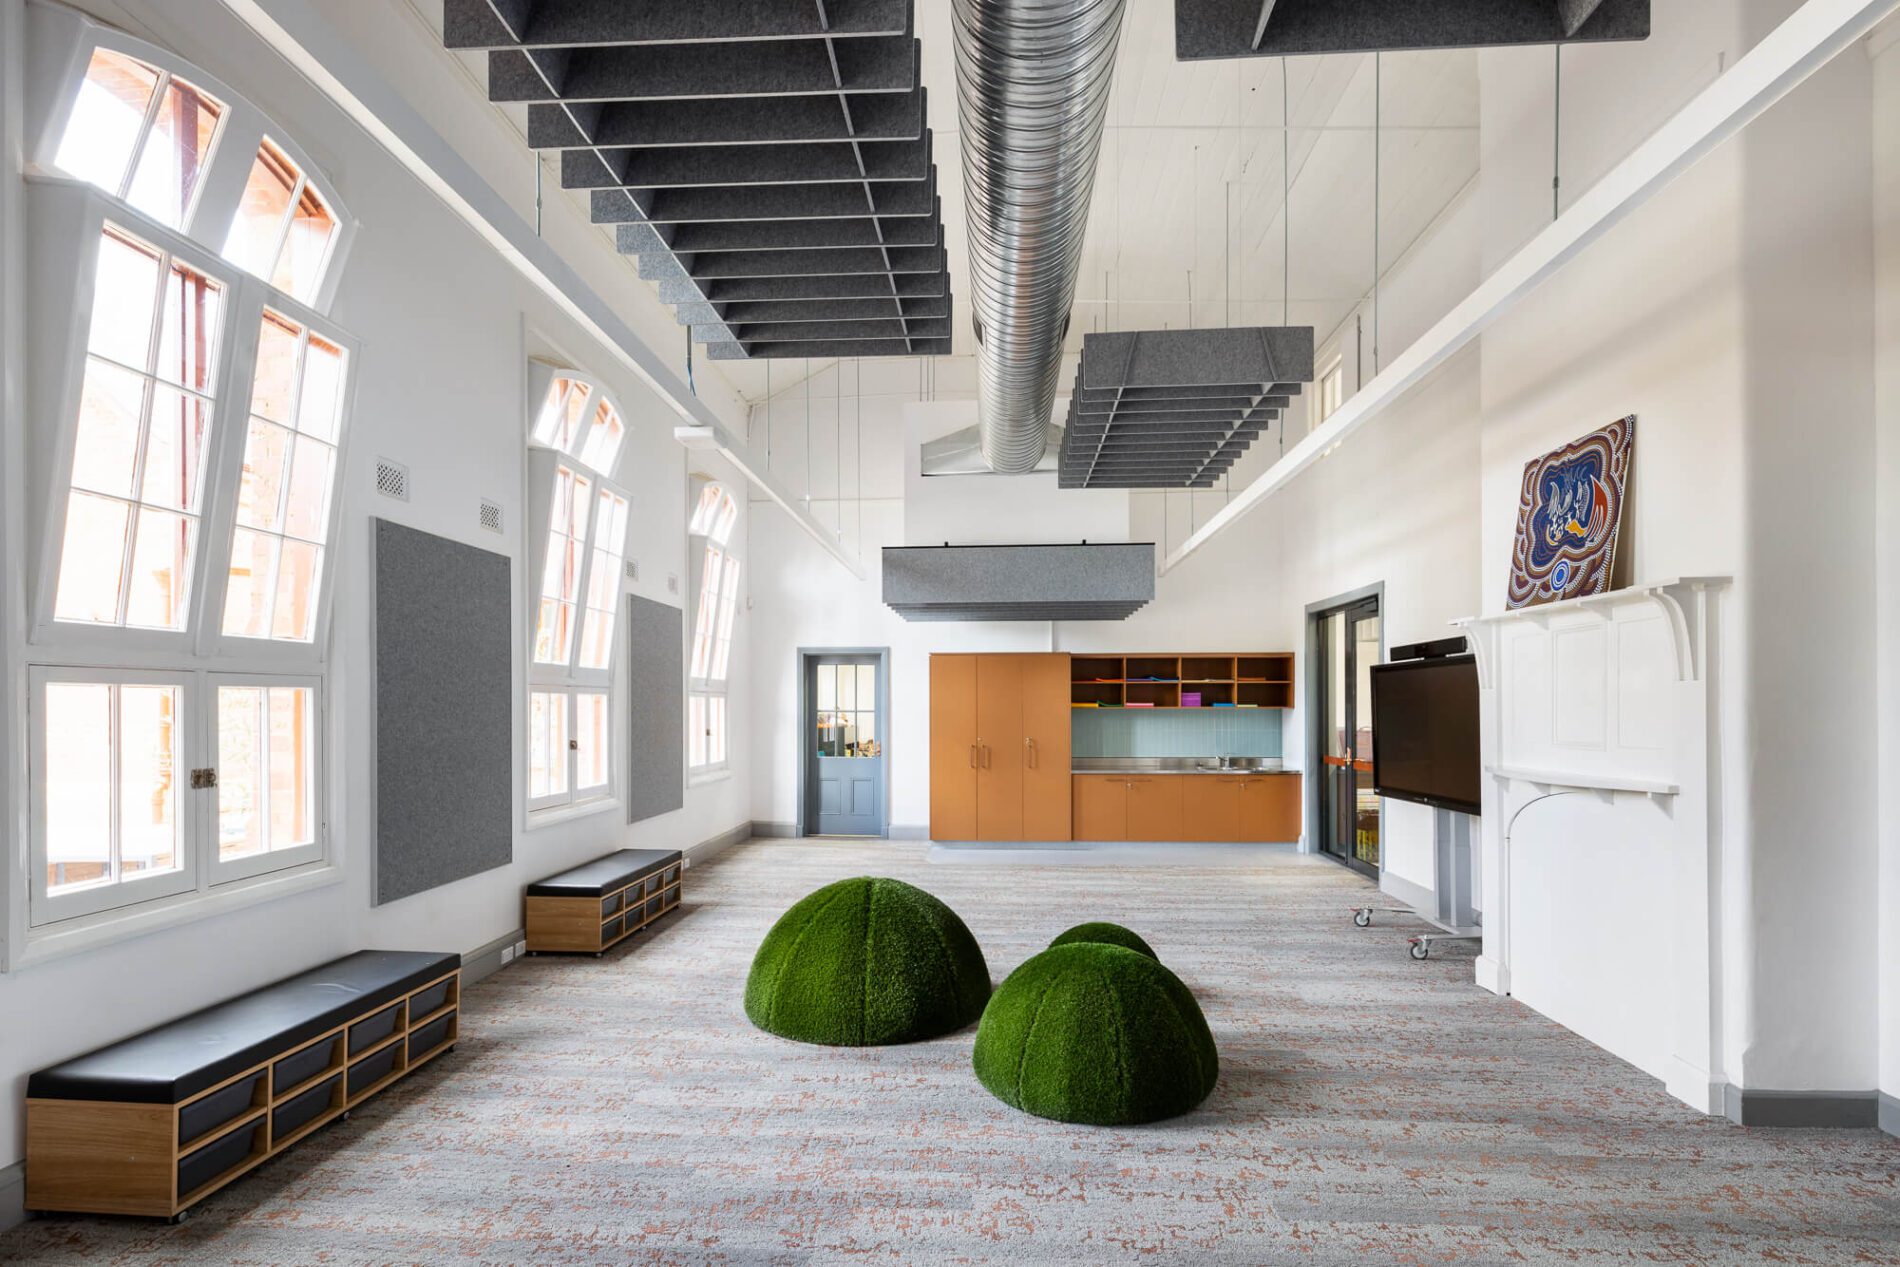 Multipurpose learning space in heritage building with three small grass cushion mounds